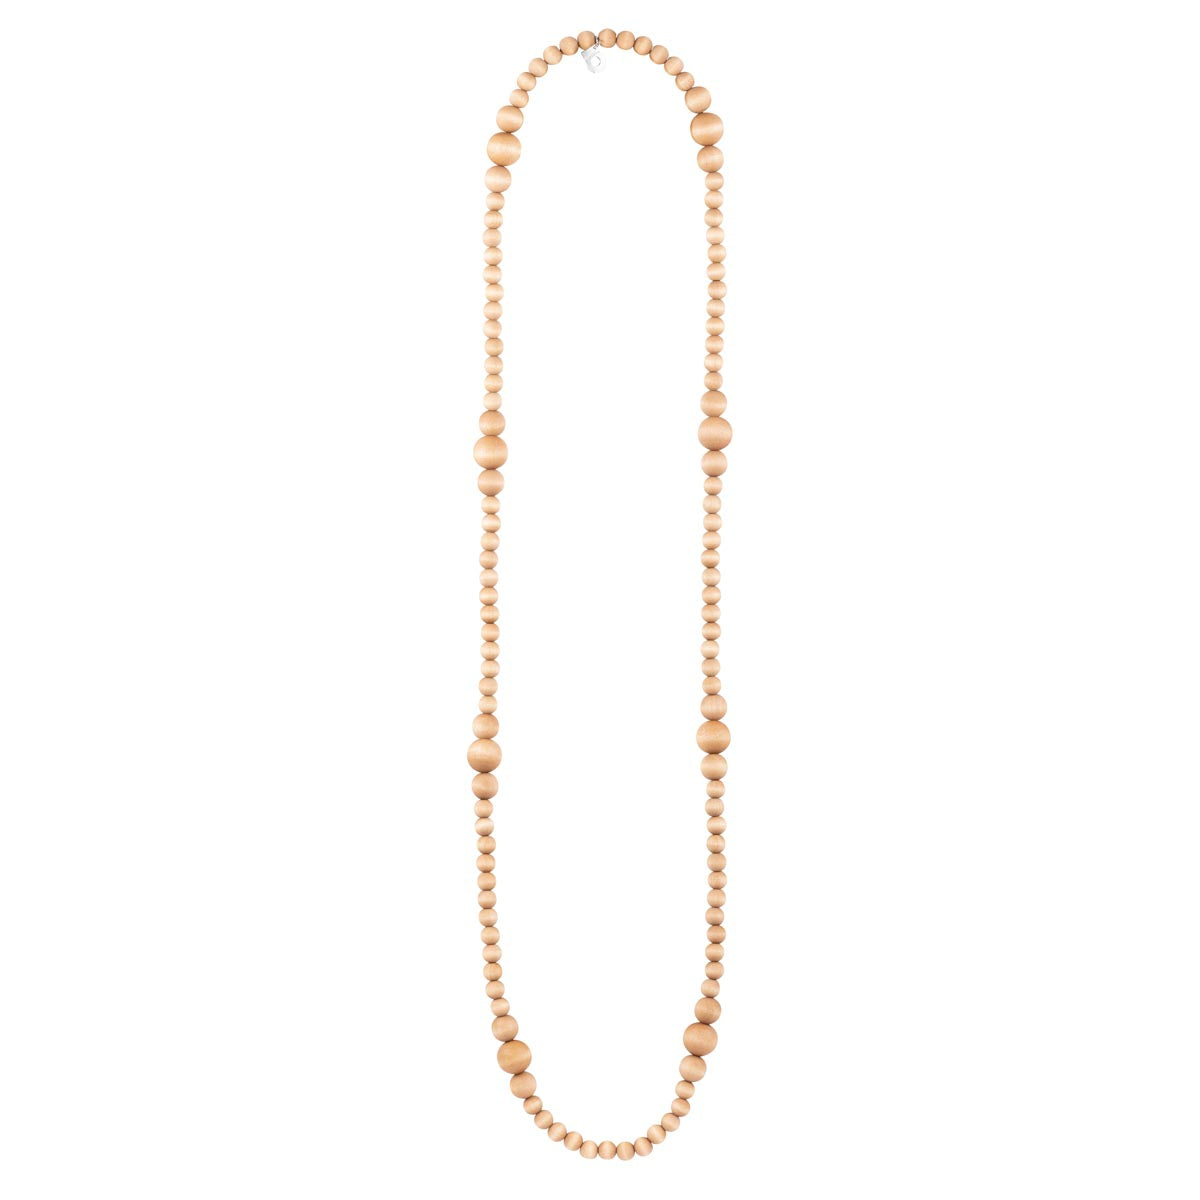 Tuulentie necklace, light brown